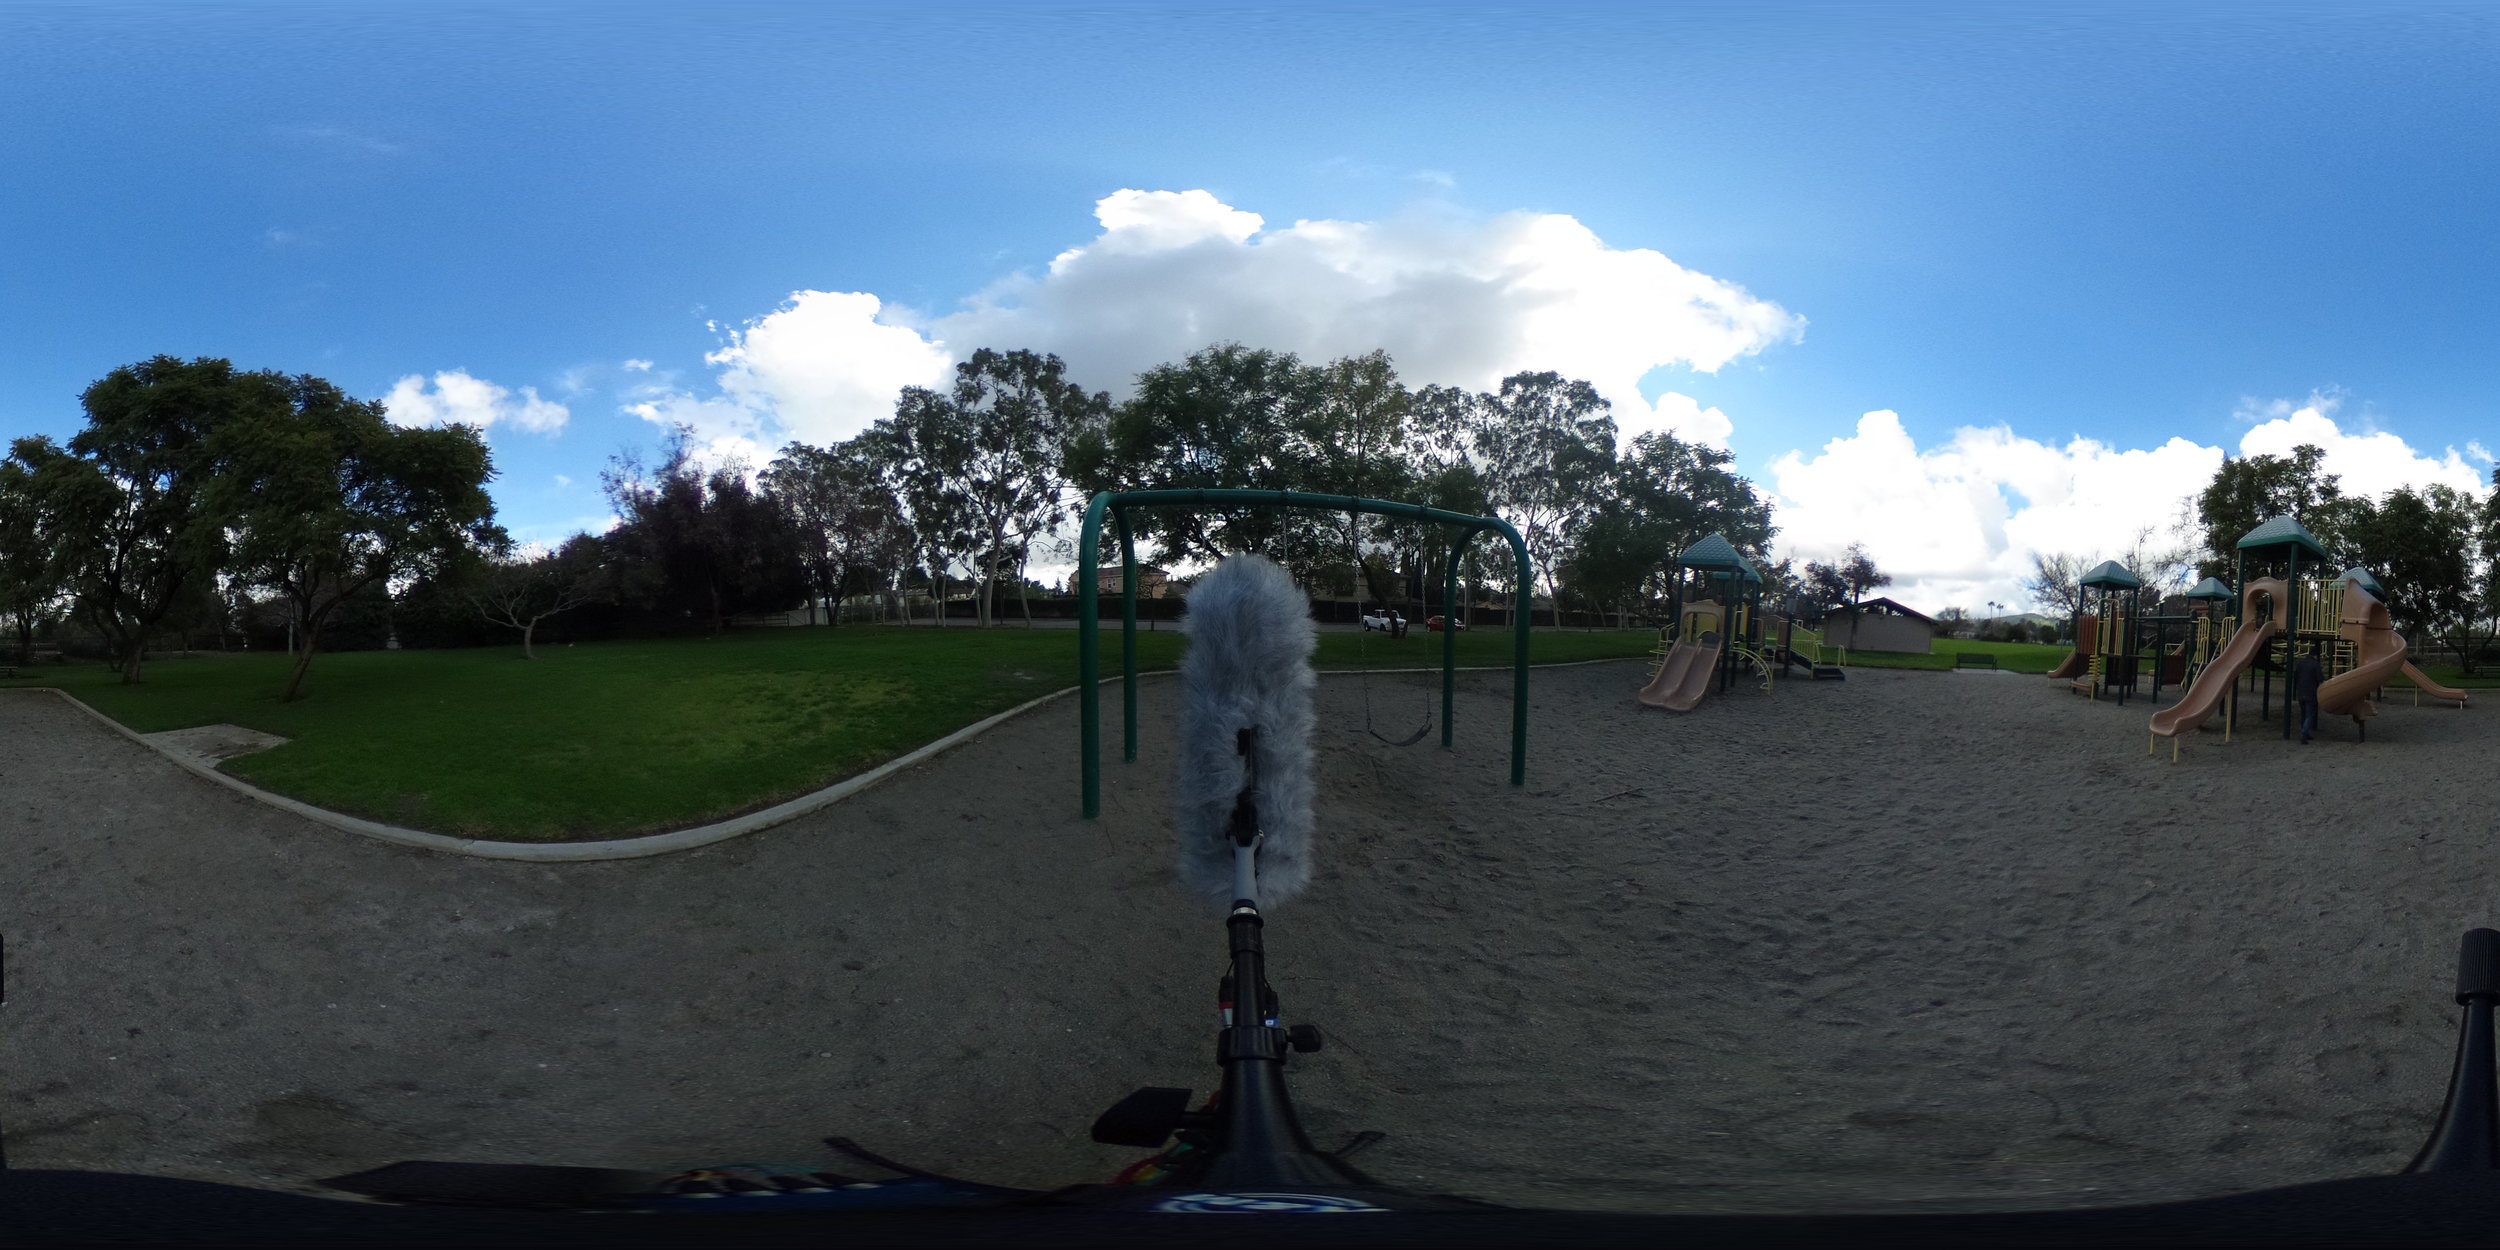 EXT_Day_Park_TwoSwingsSwinging_DistantTraffic_360PictureReference.JPG